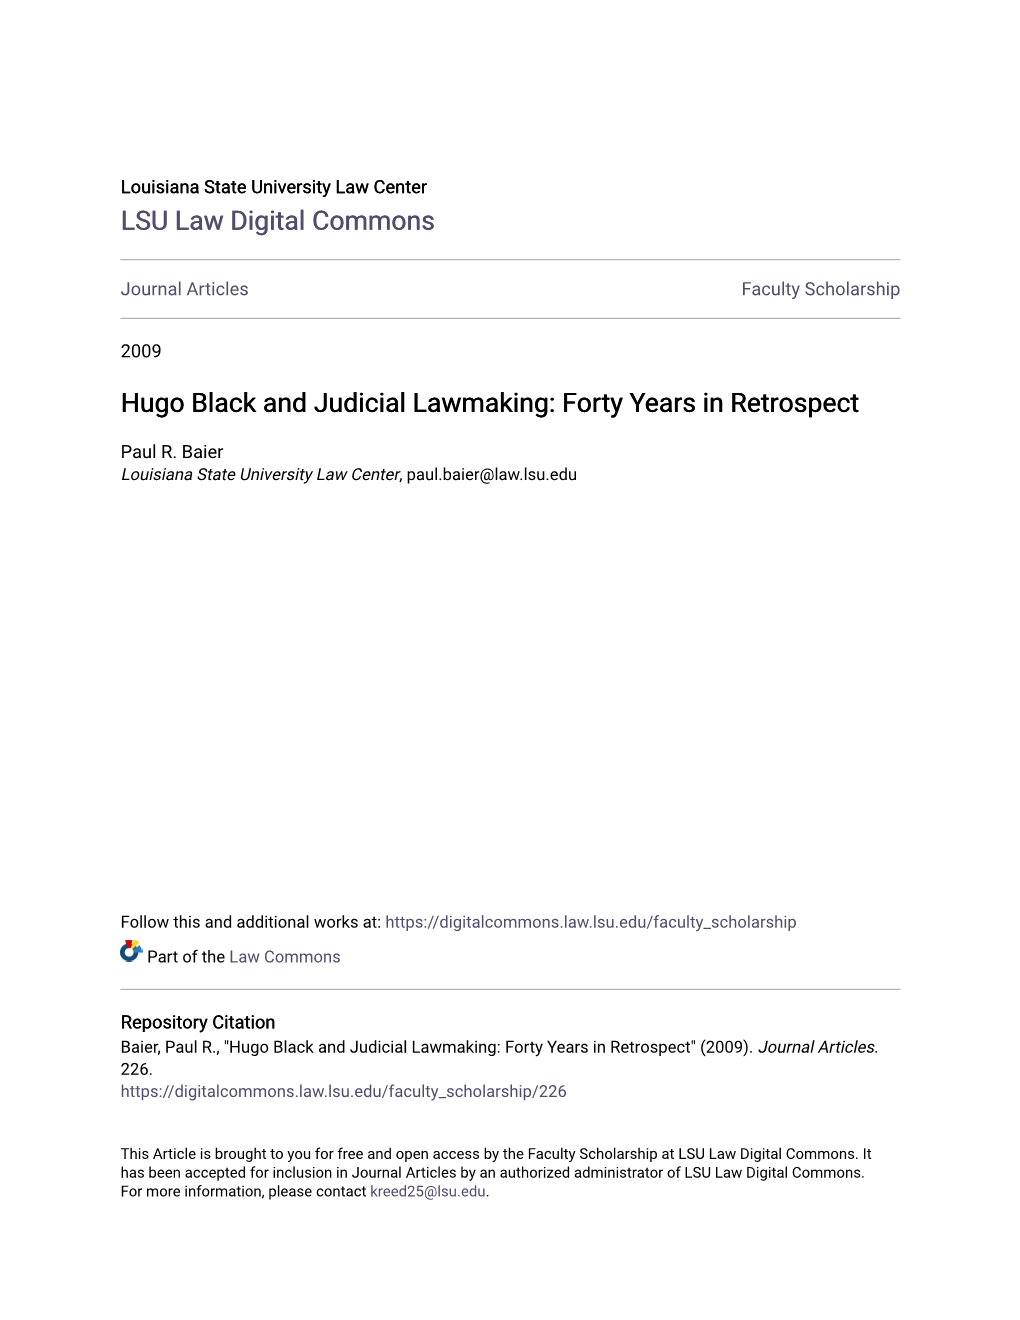 Hugo Black and Judicial Lawmaking: Forty Years in Retrospect